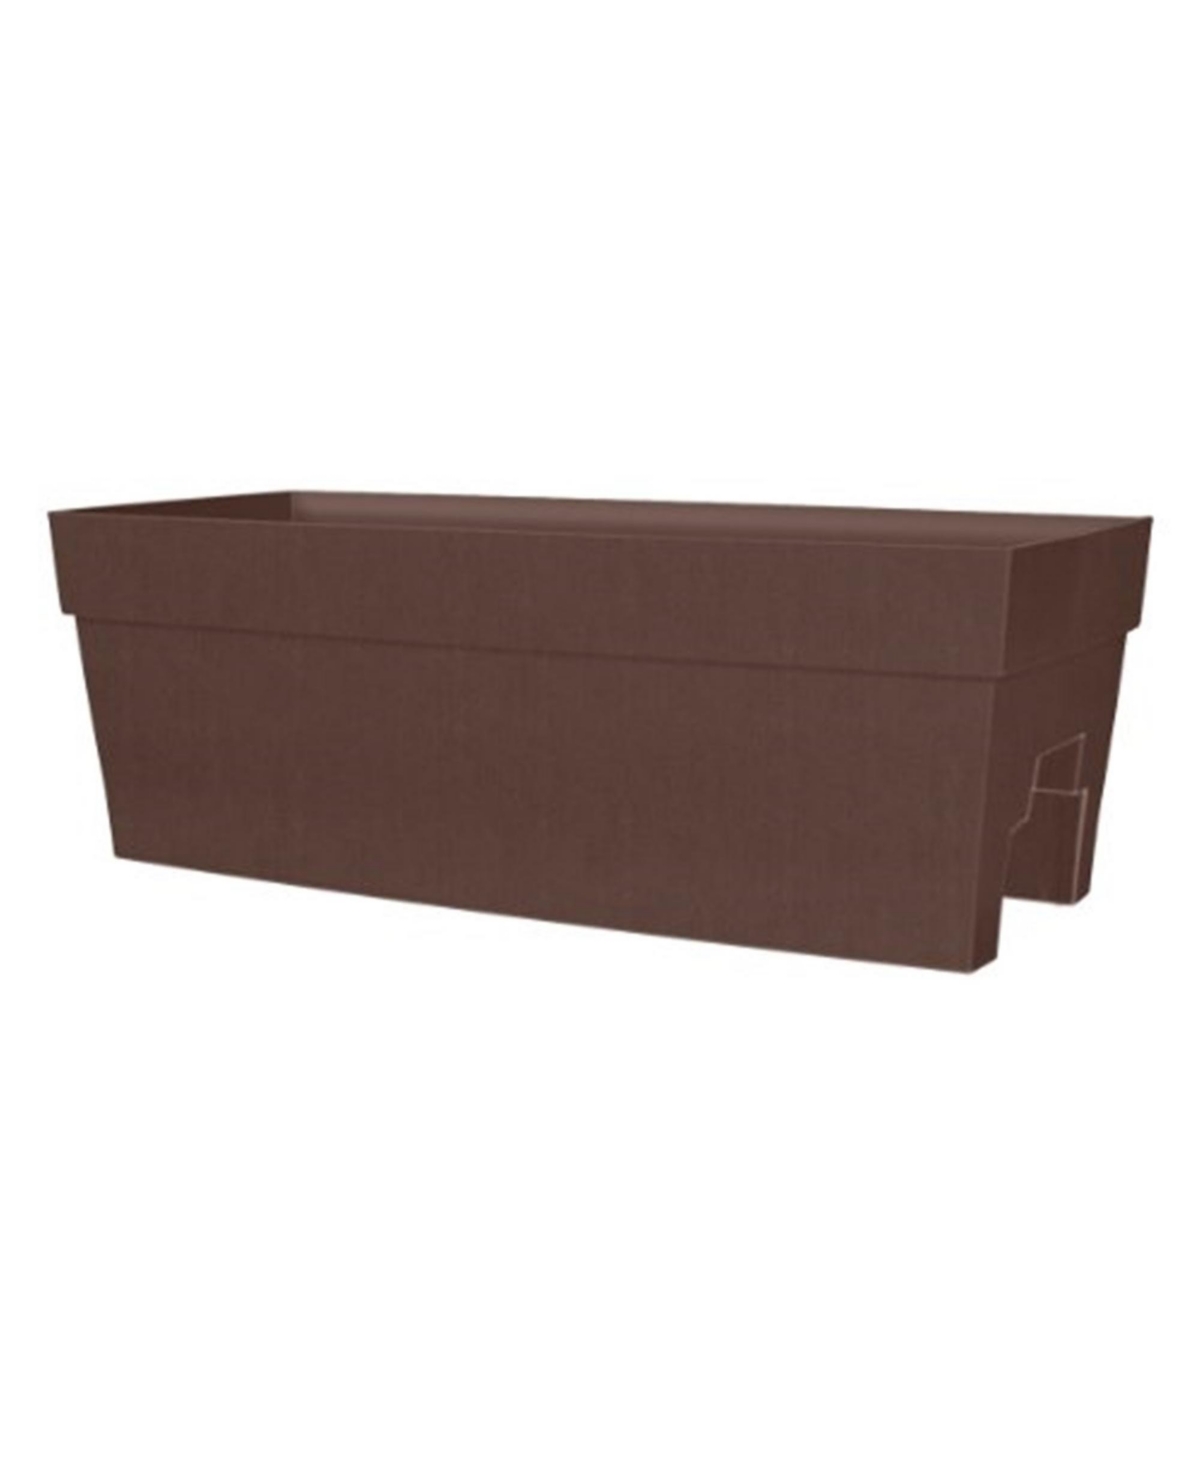 Harmony 352711 Rail Planter Brown 27in L x 11.75in W x 9.5in H - Brown